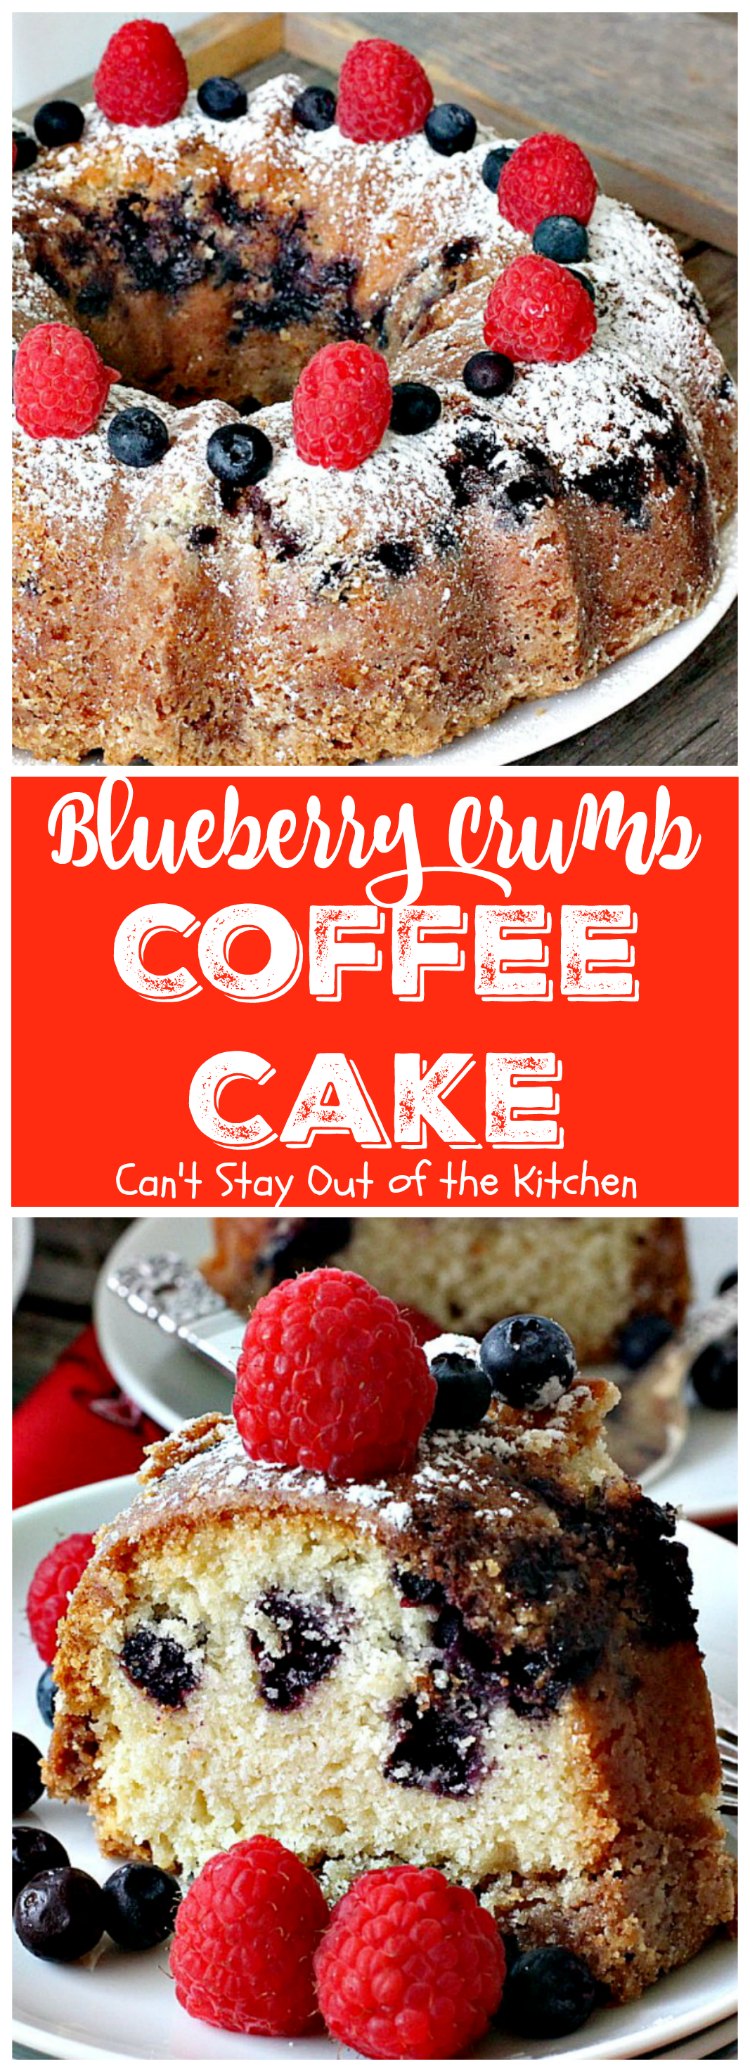 Blueberry Crumb Coffee Cake | Can't Stay Out of the Kitchen